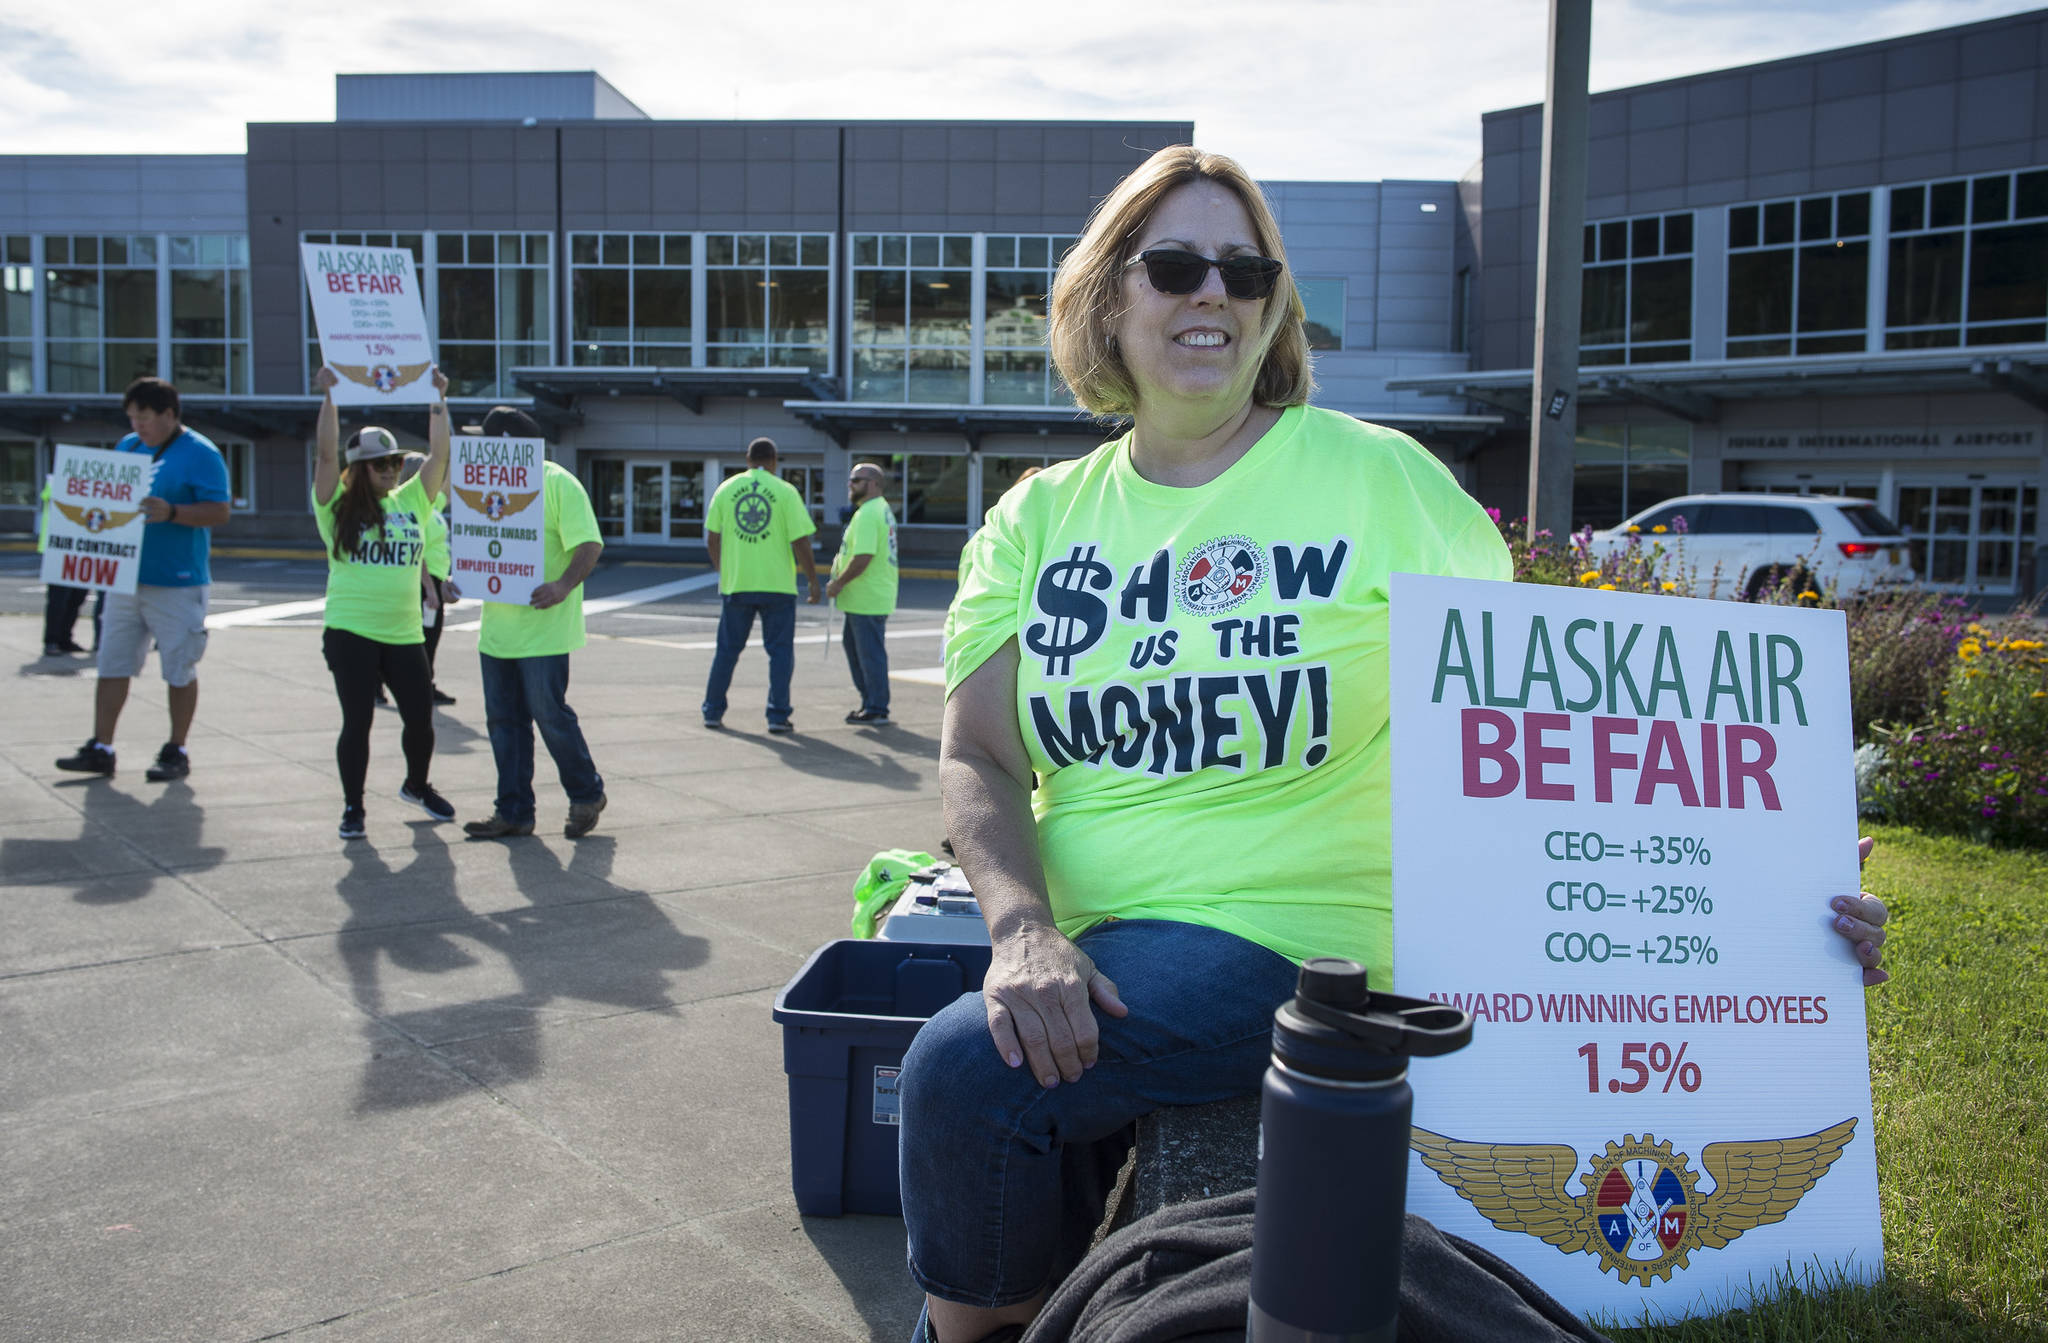 Mary Ann Breffeilh, a 20-year-employee of Alaska Airlines, joins other employees and members of the International Association of Machinists & Aerospace Workers Local 2202 to hold a protest on pay raises in front of the Juneau International Airport on Monday, Sept. 10, 2018. (Michael Penn | Juneau Empire)